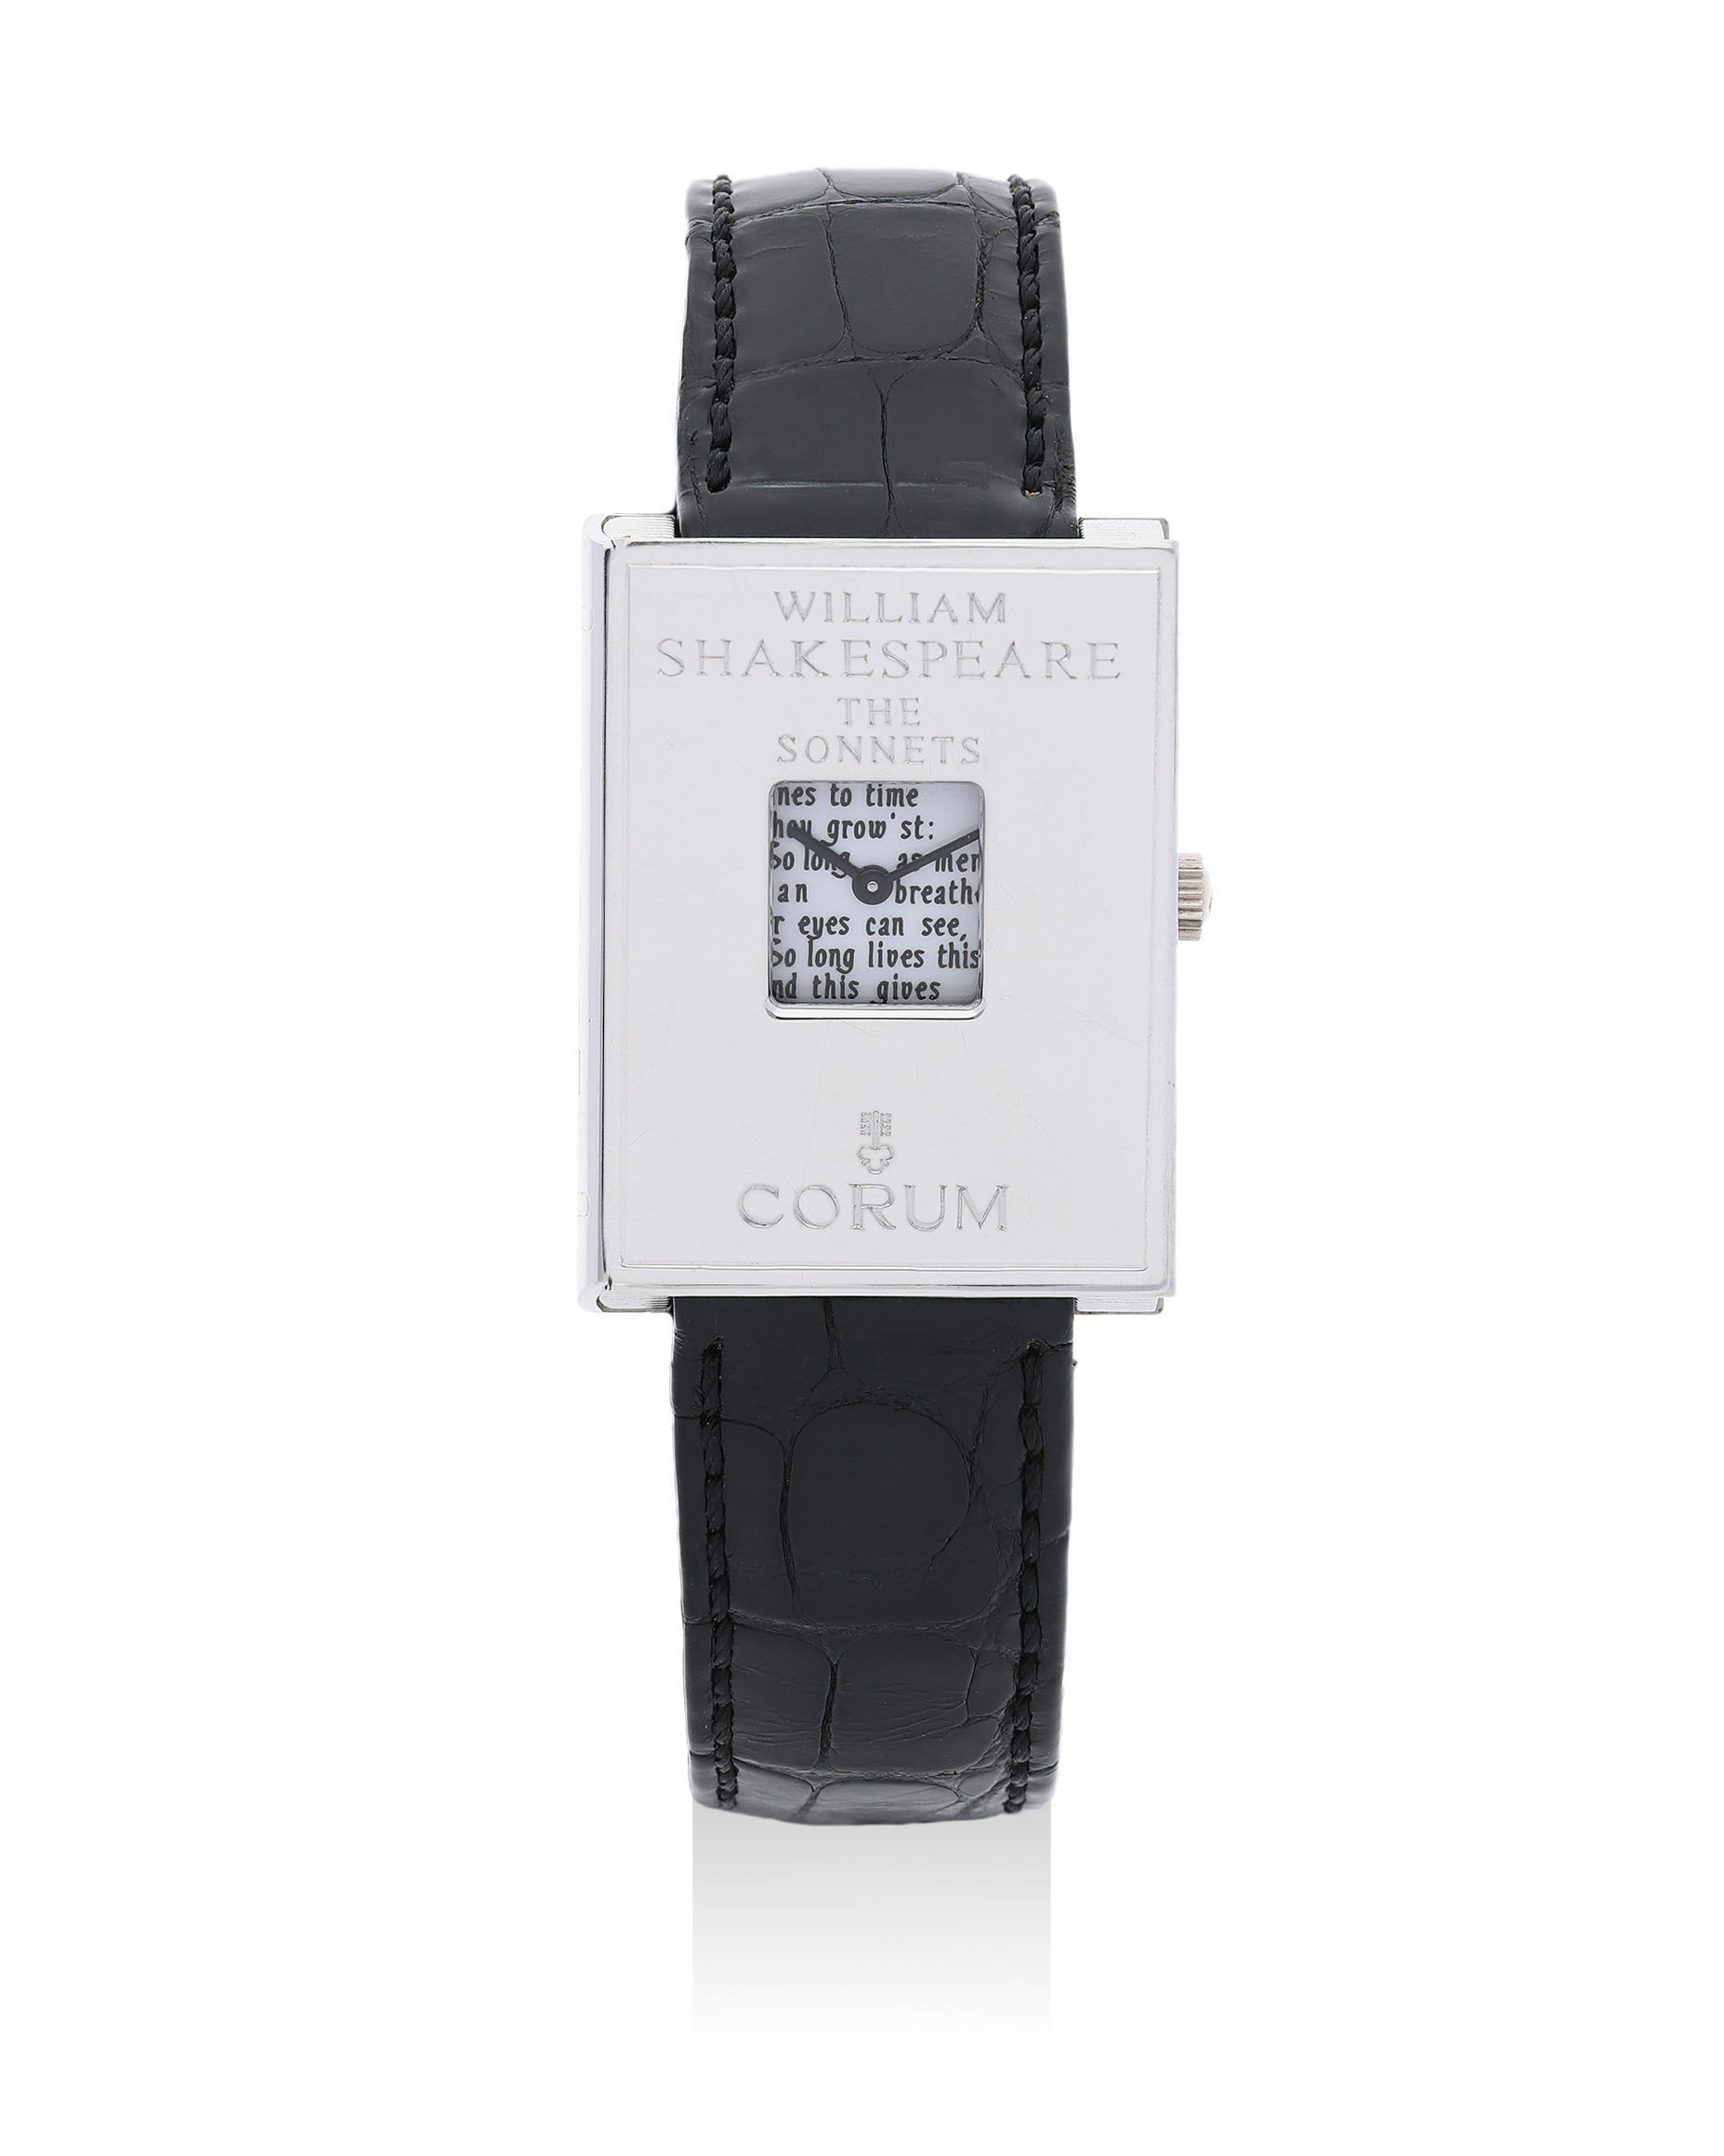 Corum | William Shakespeare - The Sonnets, A Rare Limited Edition White...